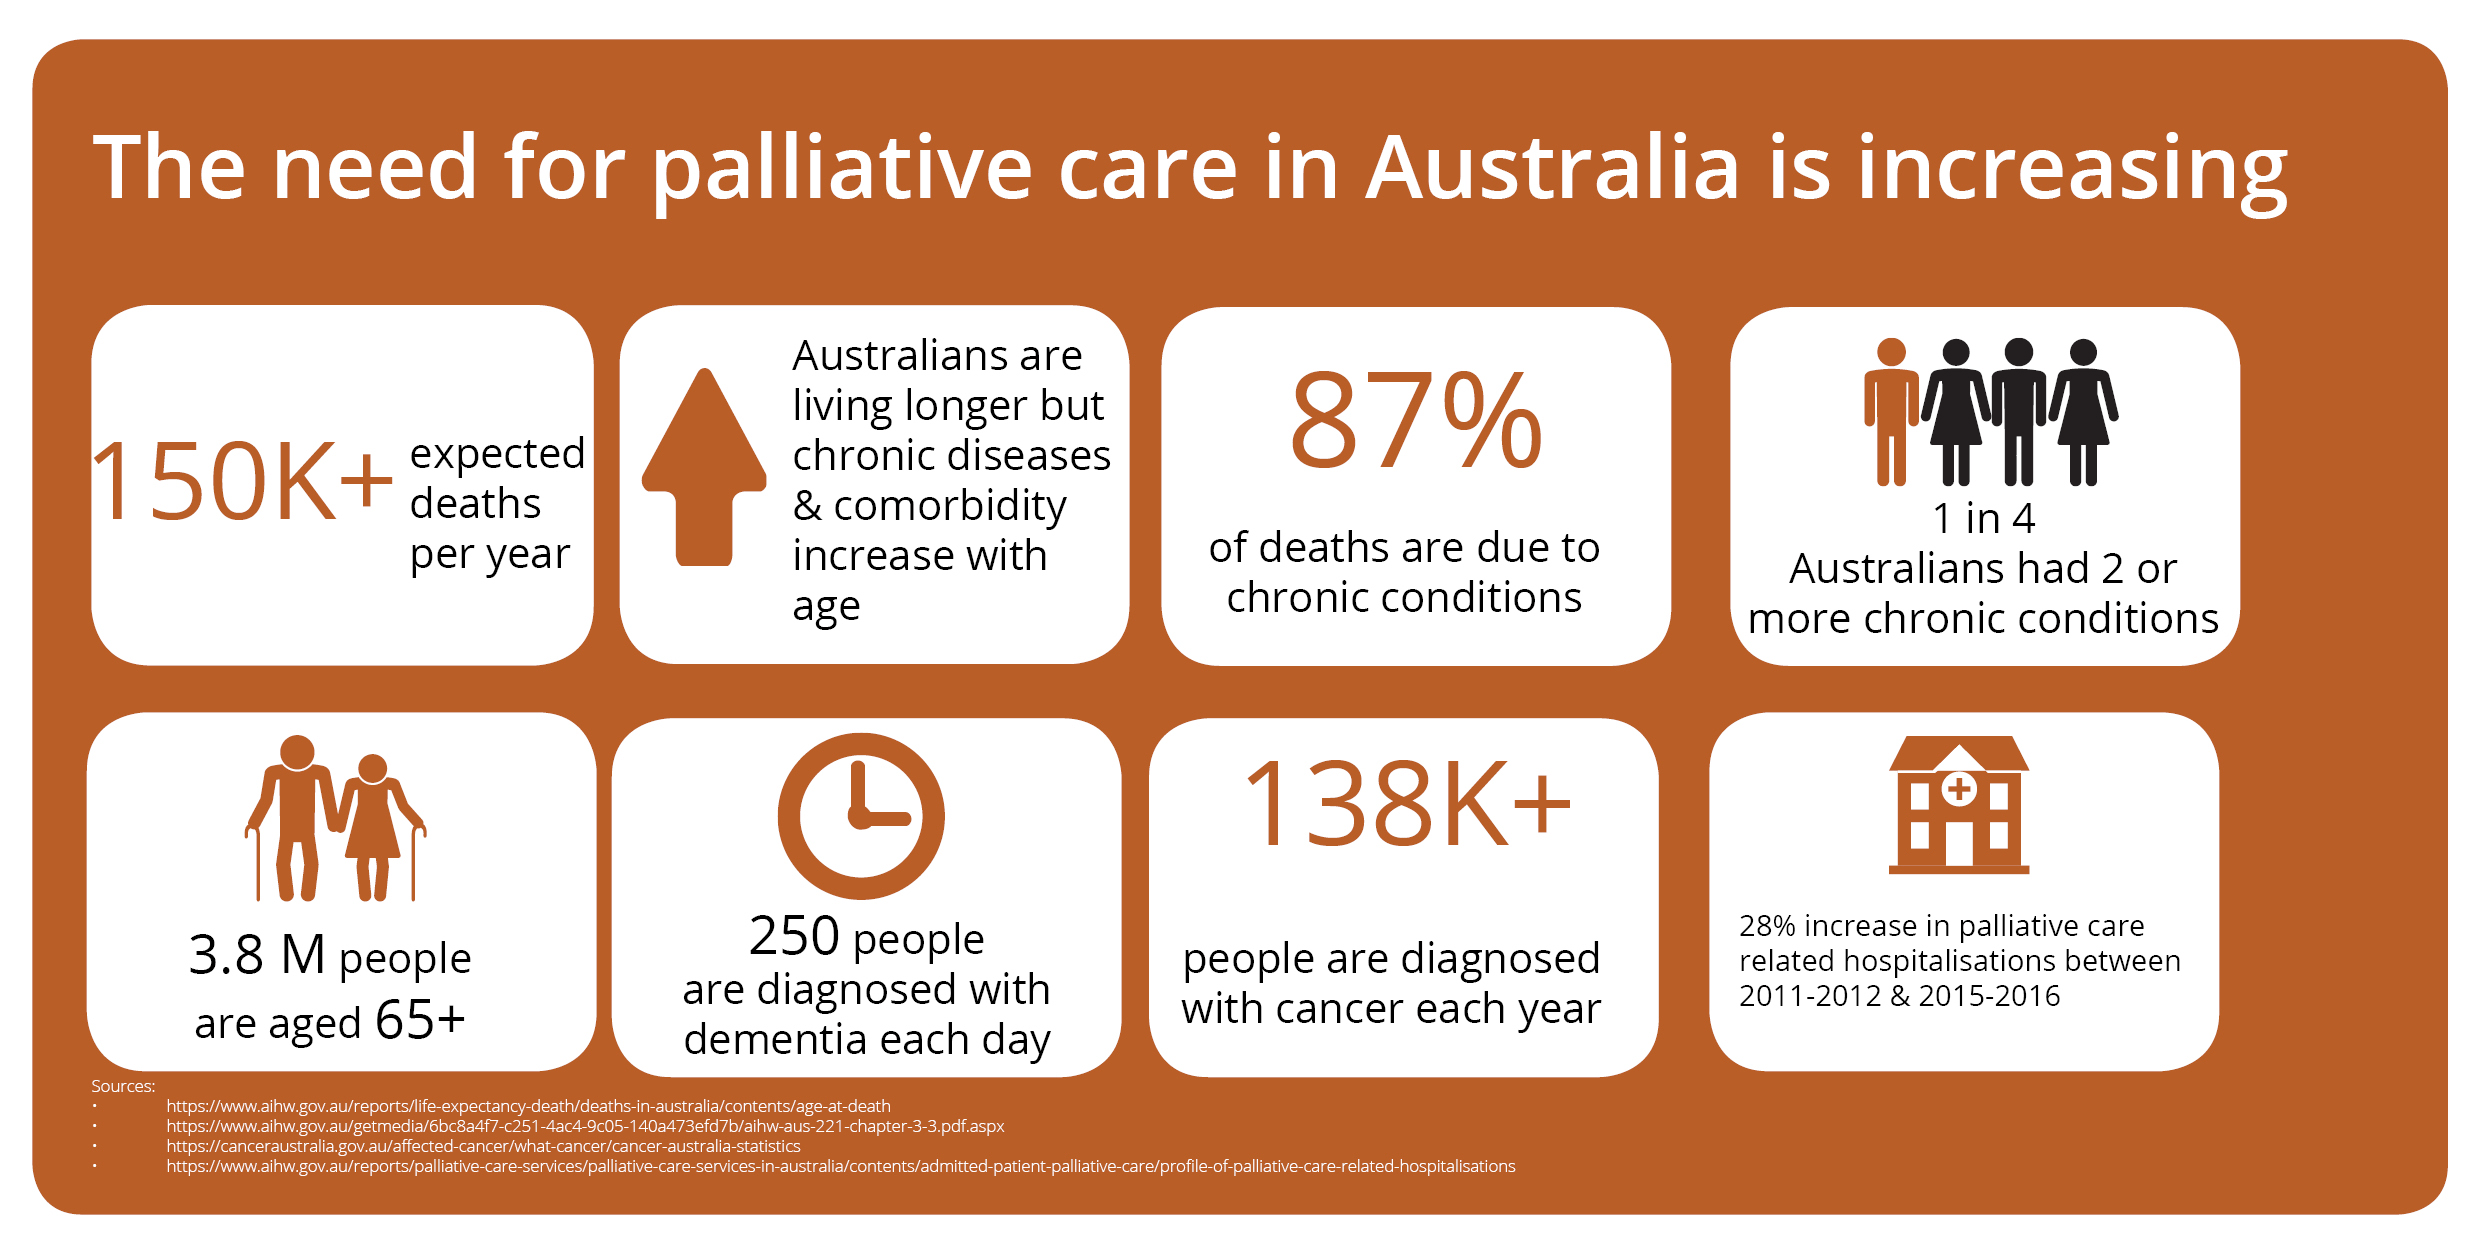 The need for palliative care in Australia is Increasing, 150K+ expected deaths per year, Australians are living longer but chronic diseases & comorbidity increase with age, 87% of deaths are due to chronic conditions, 1 in 4 Australians had 2 or more chronic conditions, 3.8M people are aged 65+, 250 people are diagnosed with dementia each day, 138K+ people are diagnosed with cancer each year, 28% increase in palliative care related hospitalisaitons between 2011-2012 & 2015-2016